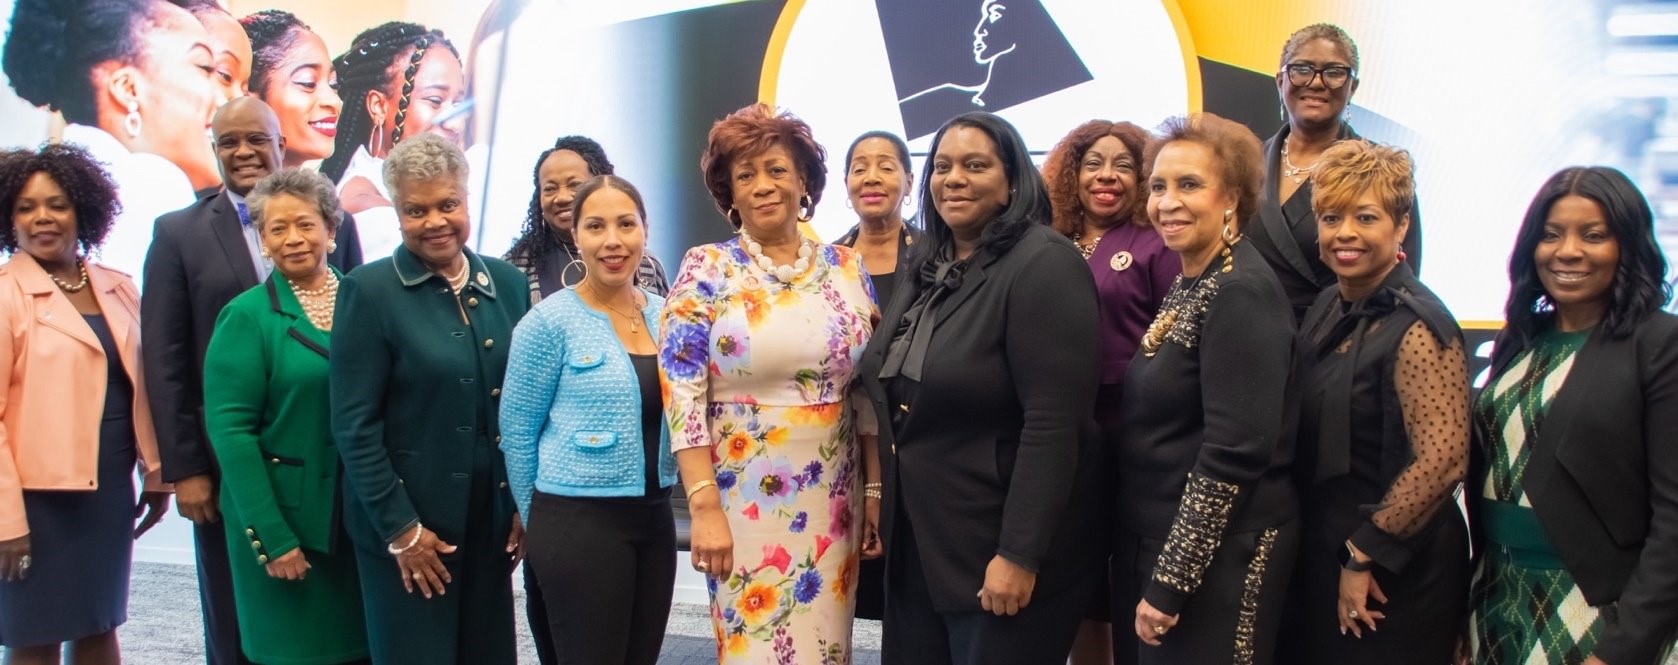 National Coalition of 100 Black Women event